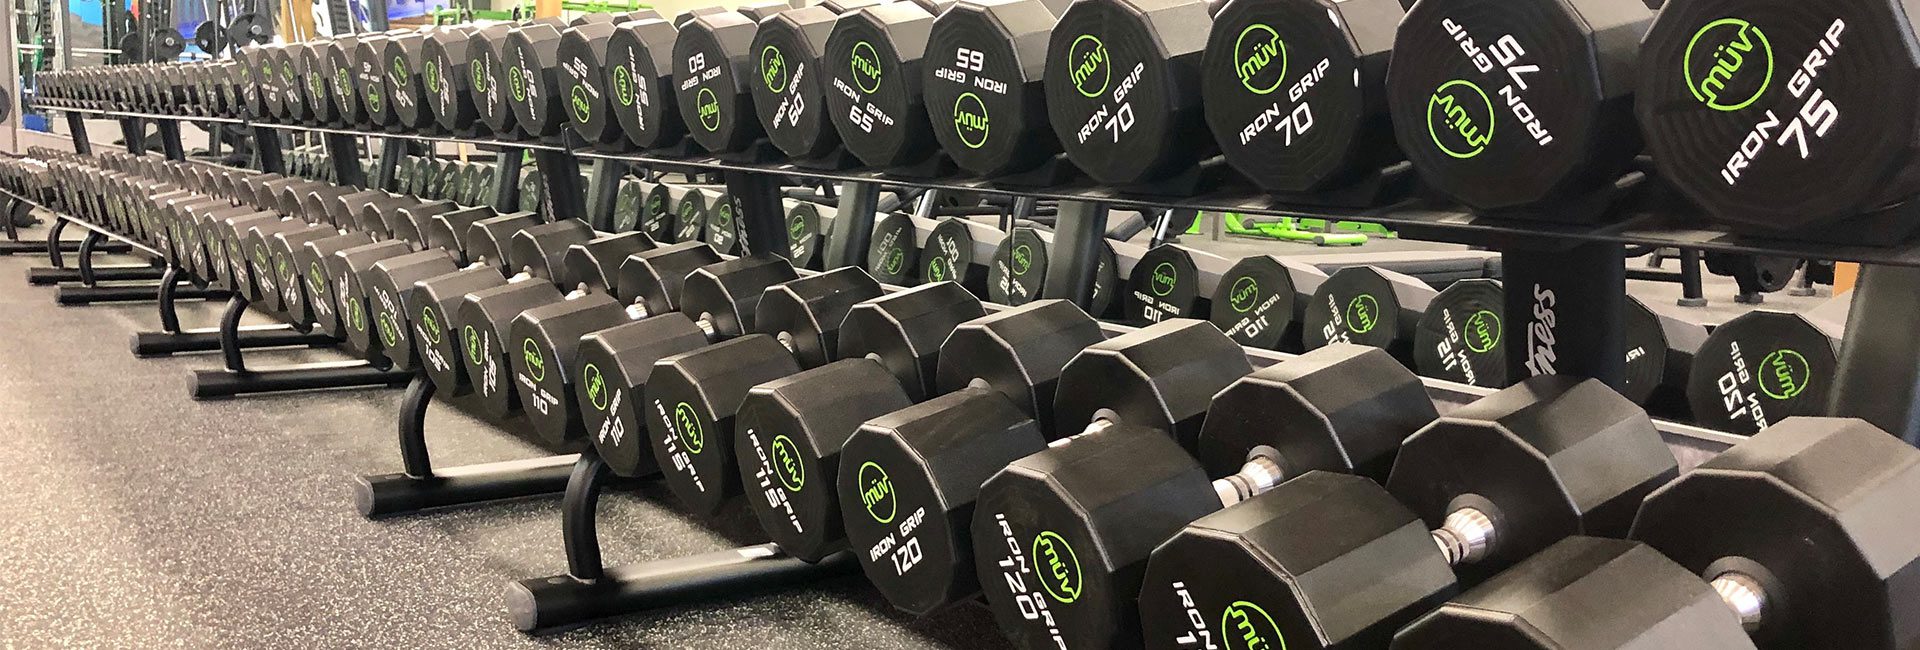 rack of weights lined up in gym near me south spokane